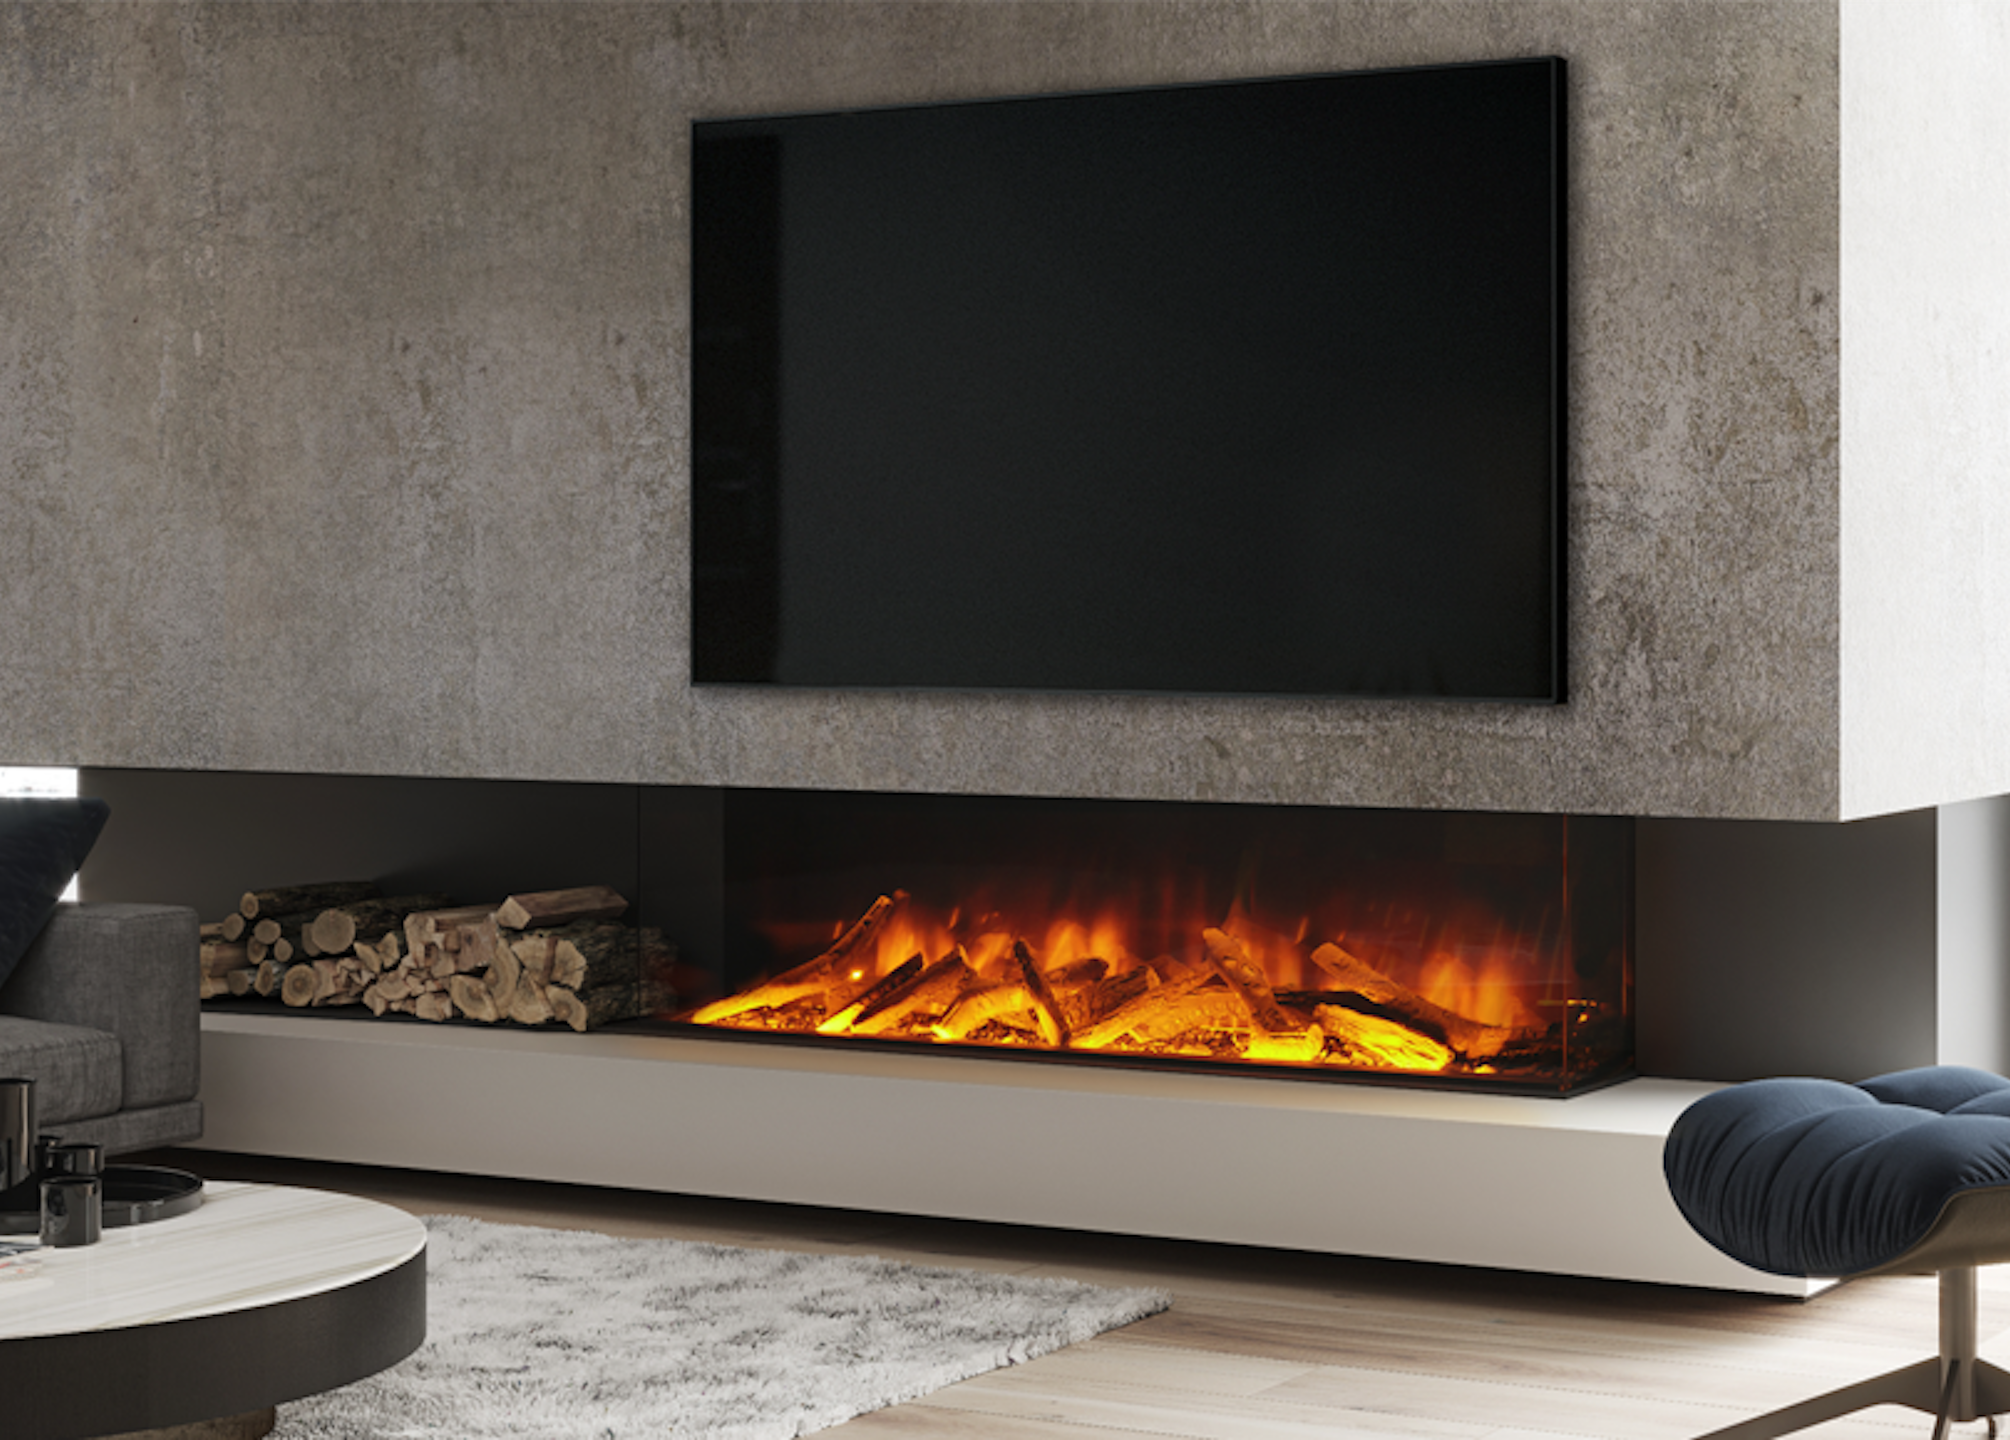 New-York-Design-Center-WNWN-Milano-Smart-Living-Electric-Fireplace-Gallery-2